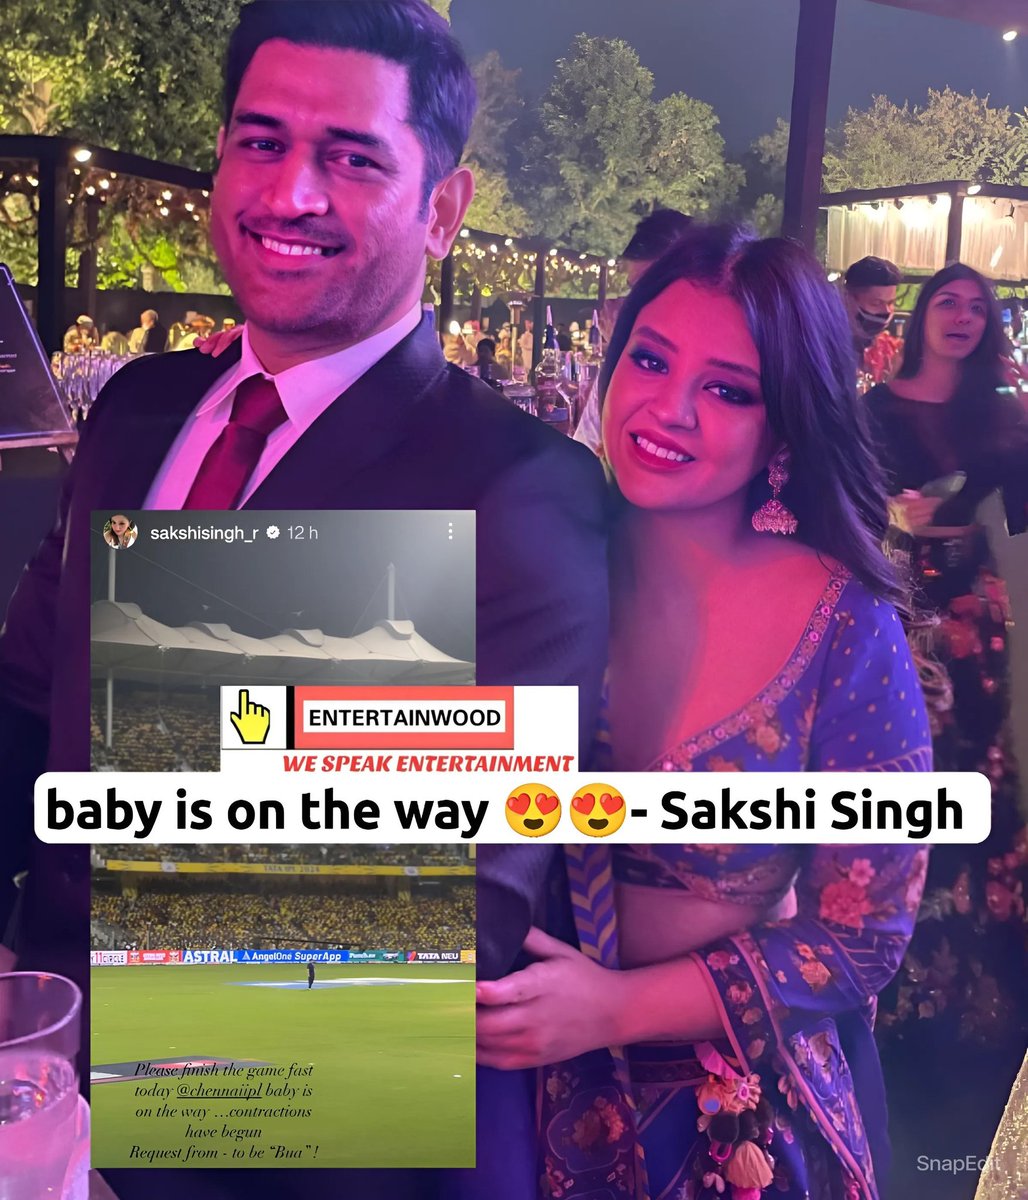 #SakshiSingh on her recent story - Baby is on the way 😍😍 #MSDhoni #CSKvsSRH